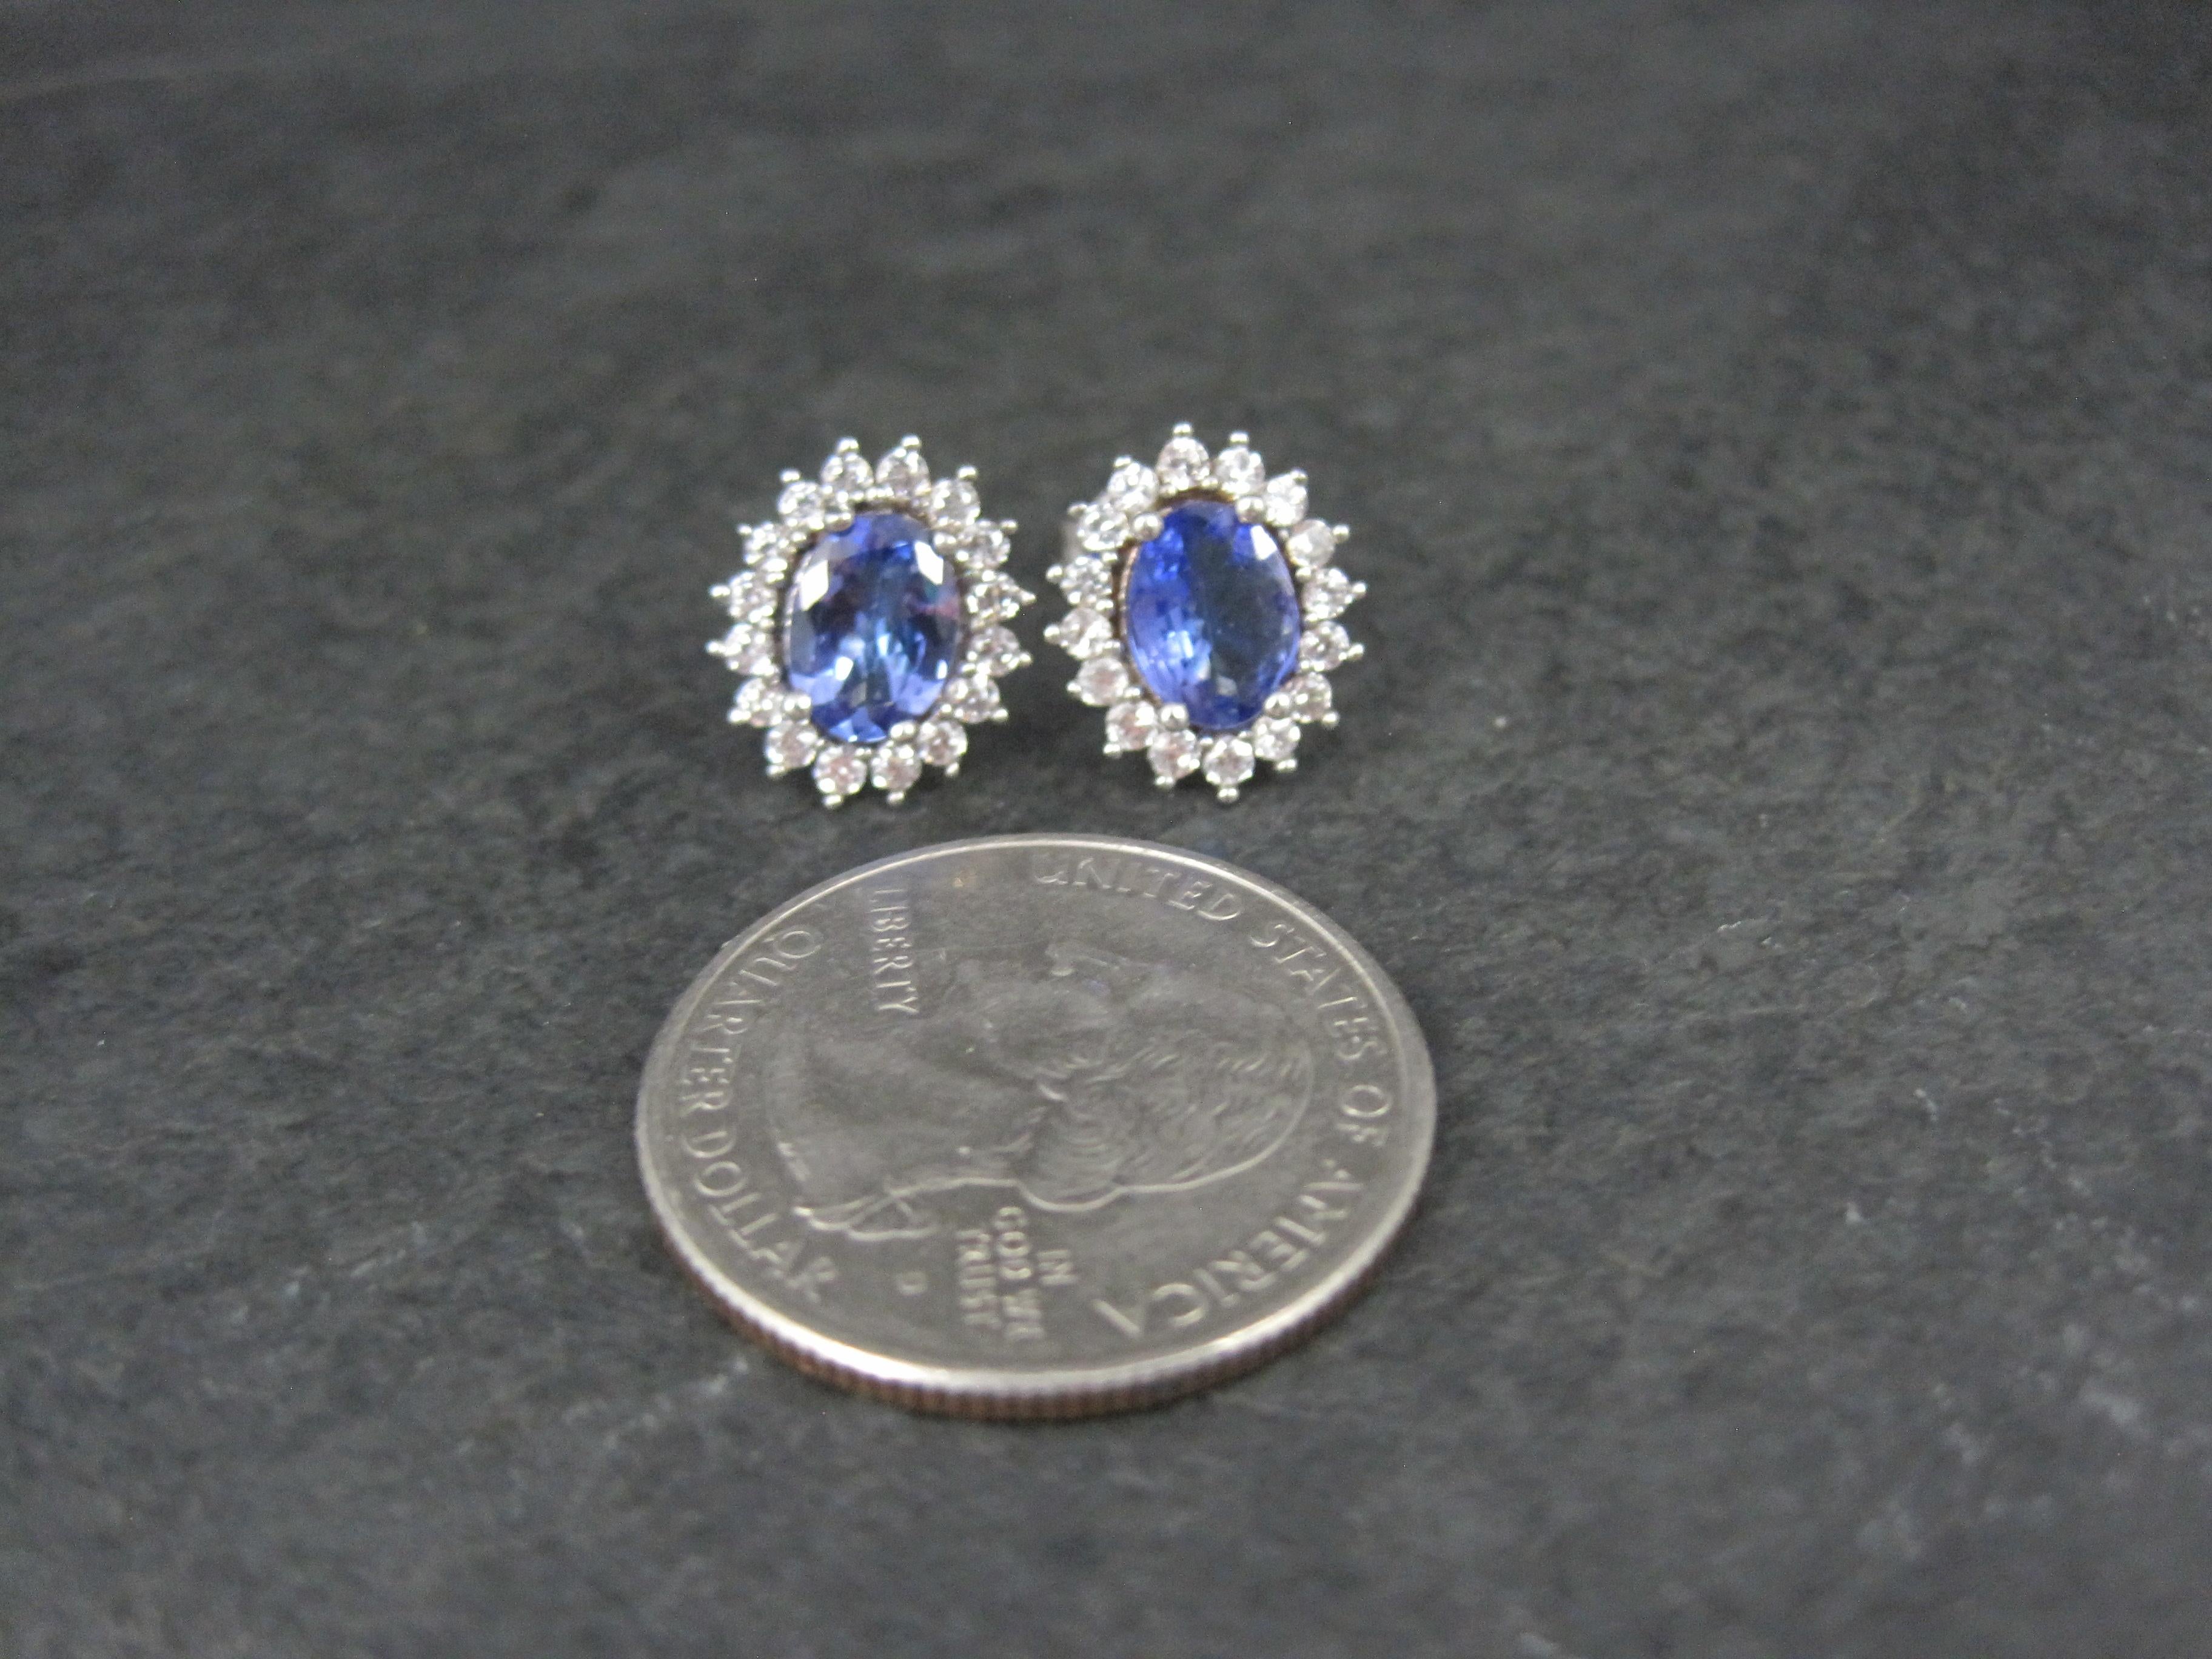 Oval Cut Tanzanite and White Spinel Stud Earrings Sterling Silver For Sale